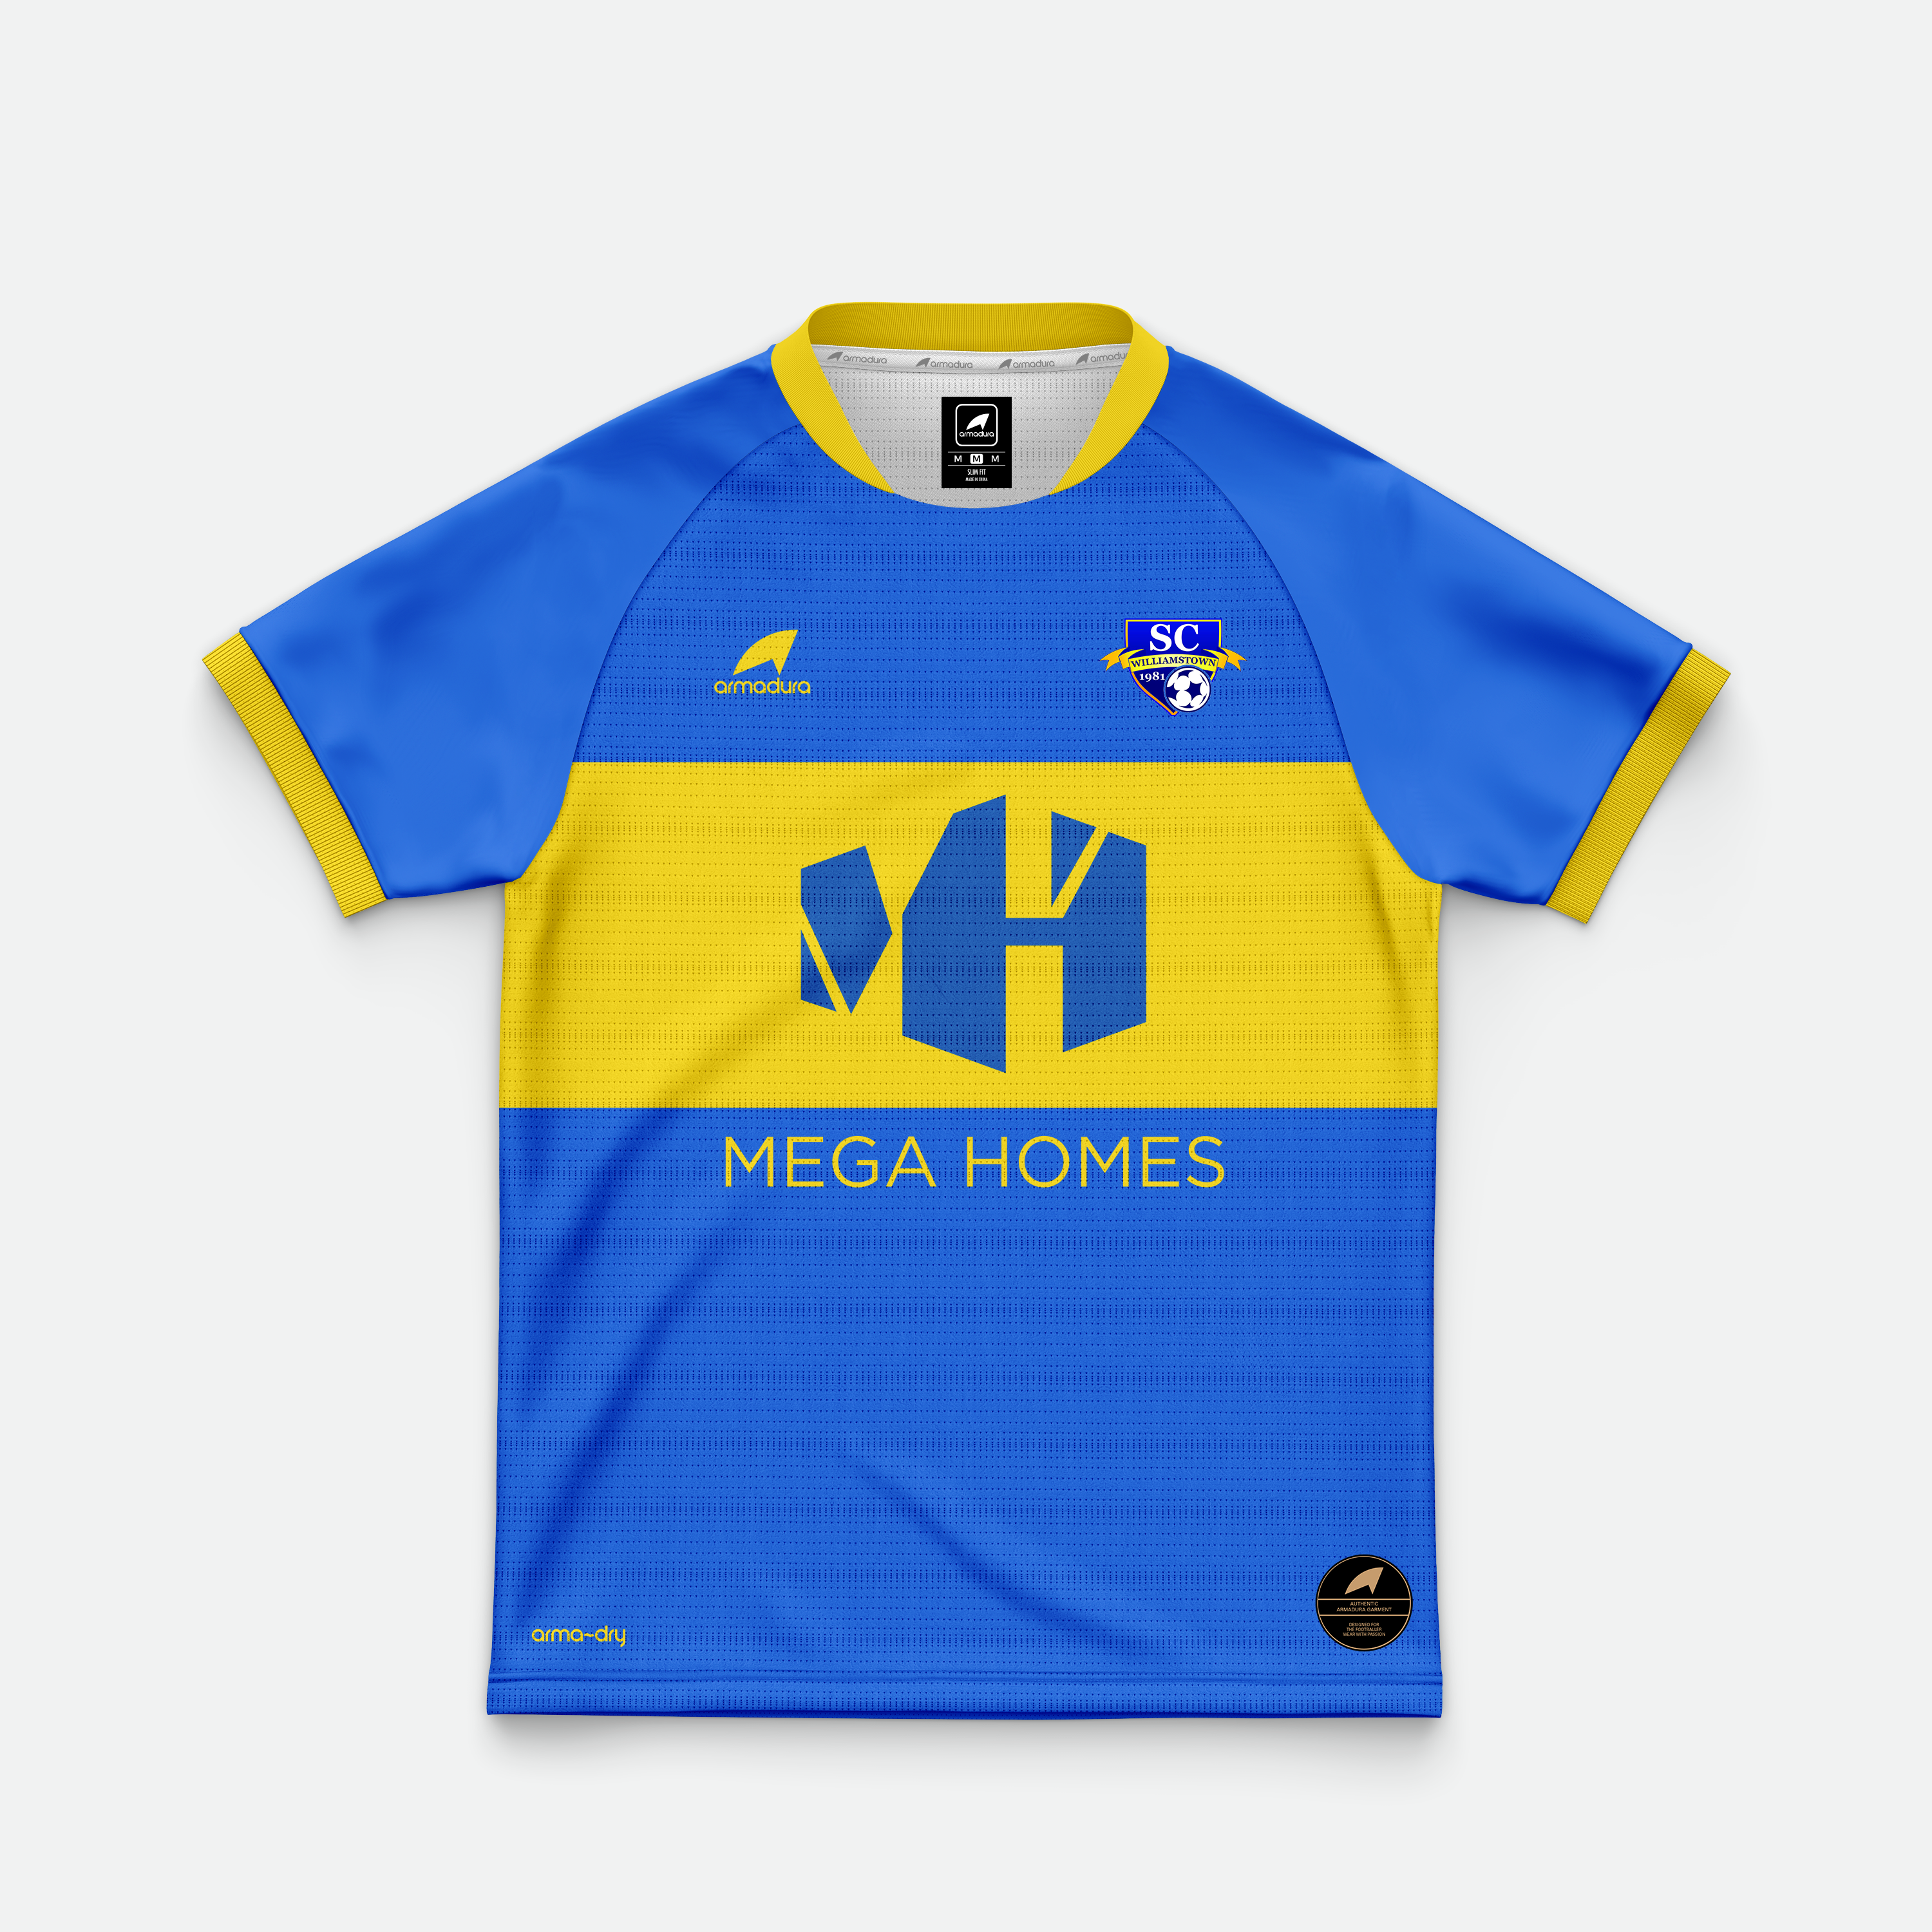 2020 Williamstown Away.png__PID:83c0124d-e245-4e2c-95ae-c0f136613839